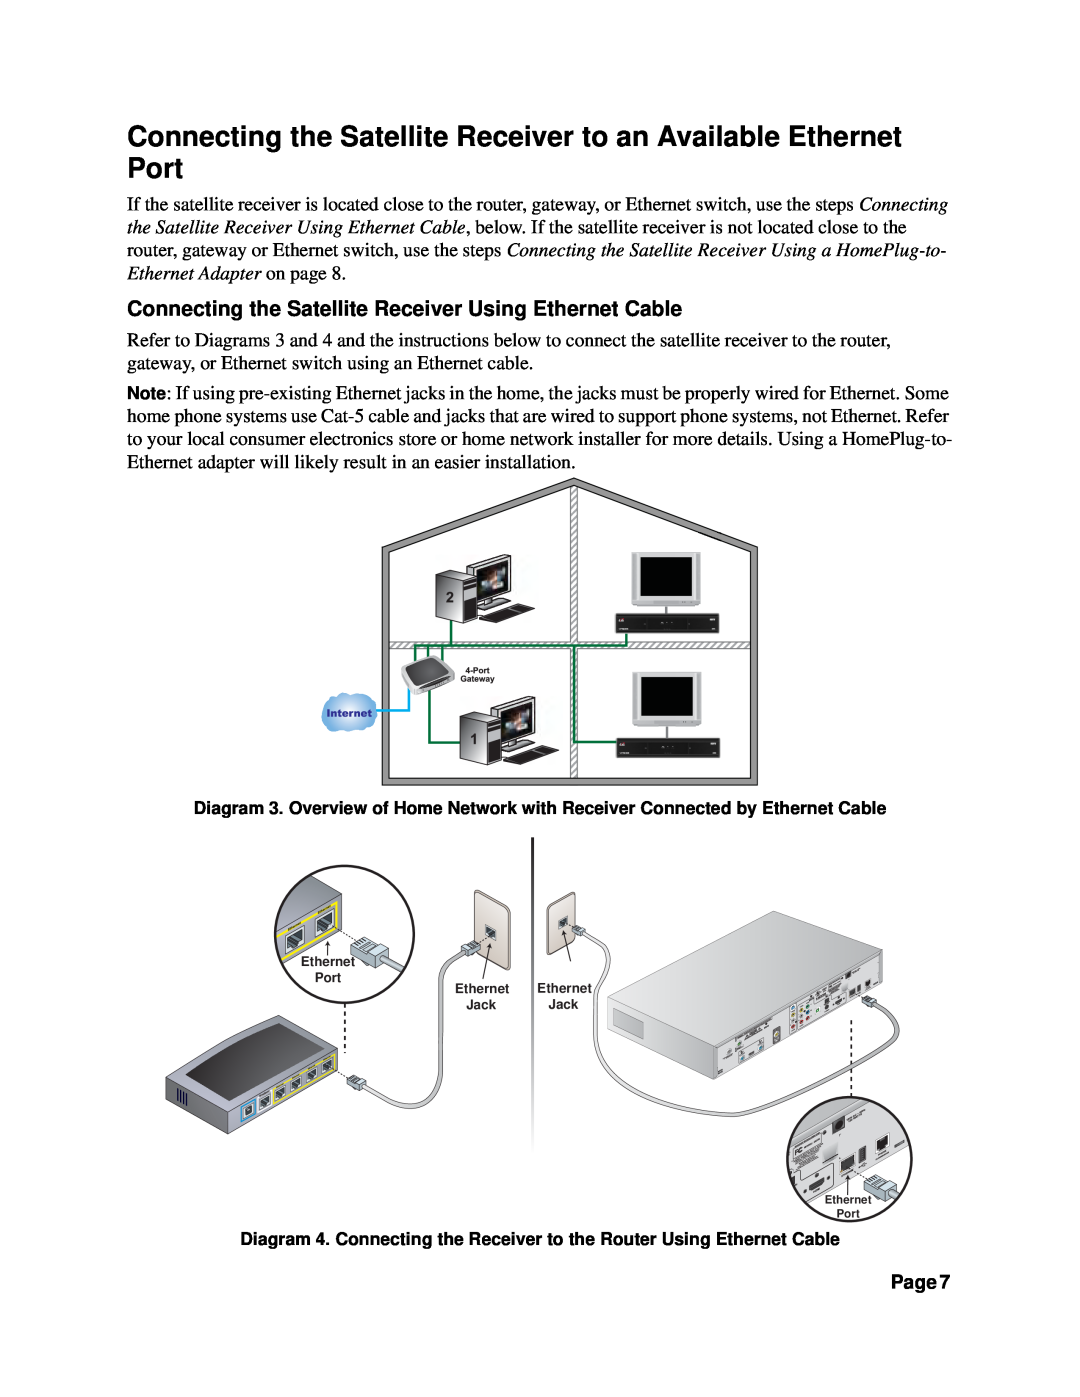 Dish Network HOME NETWORK manual Connecting the Satellite Receiver to an Available Ethernet Port, Page 